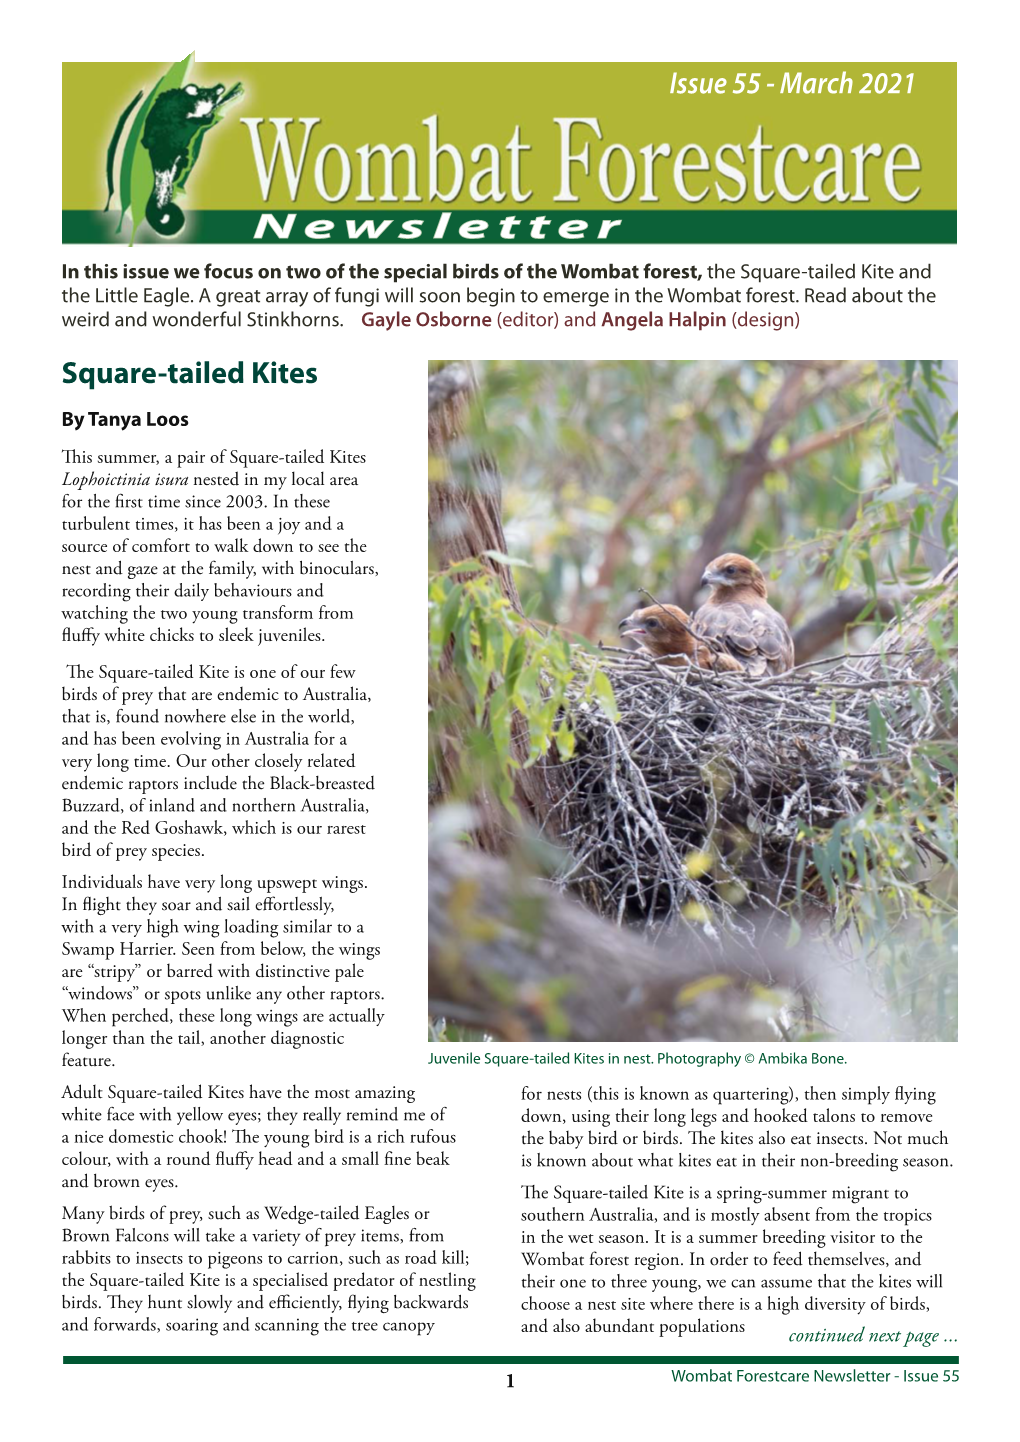 Newsletter in This Issue We Focus on Two of the Special Birds of the Wombat Forest, the Square-Tailed Kite and the Little Eagle